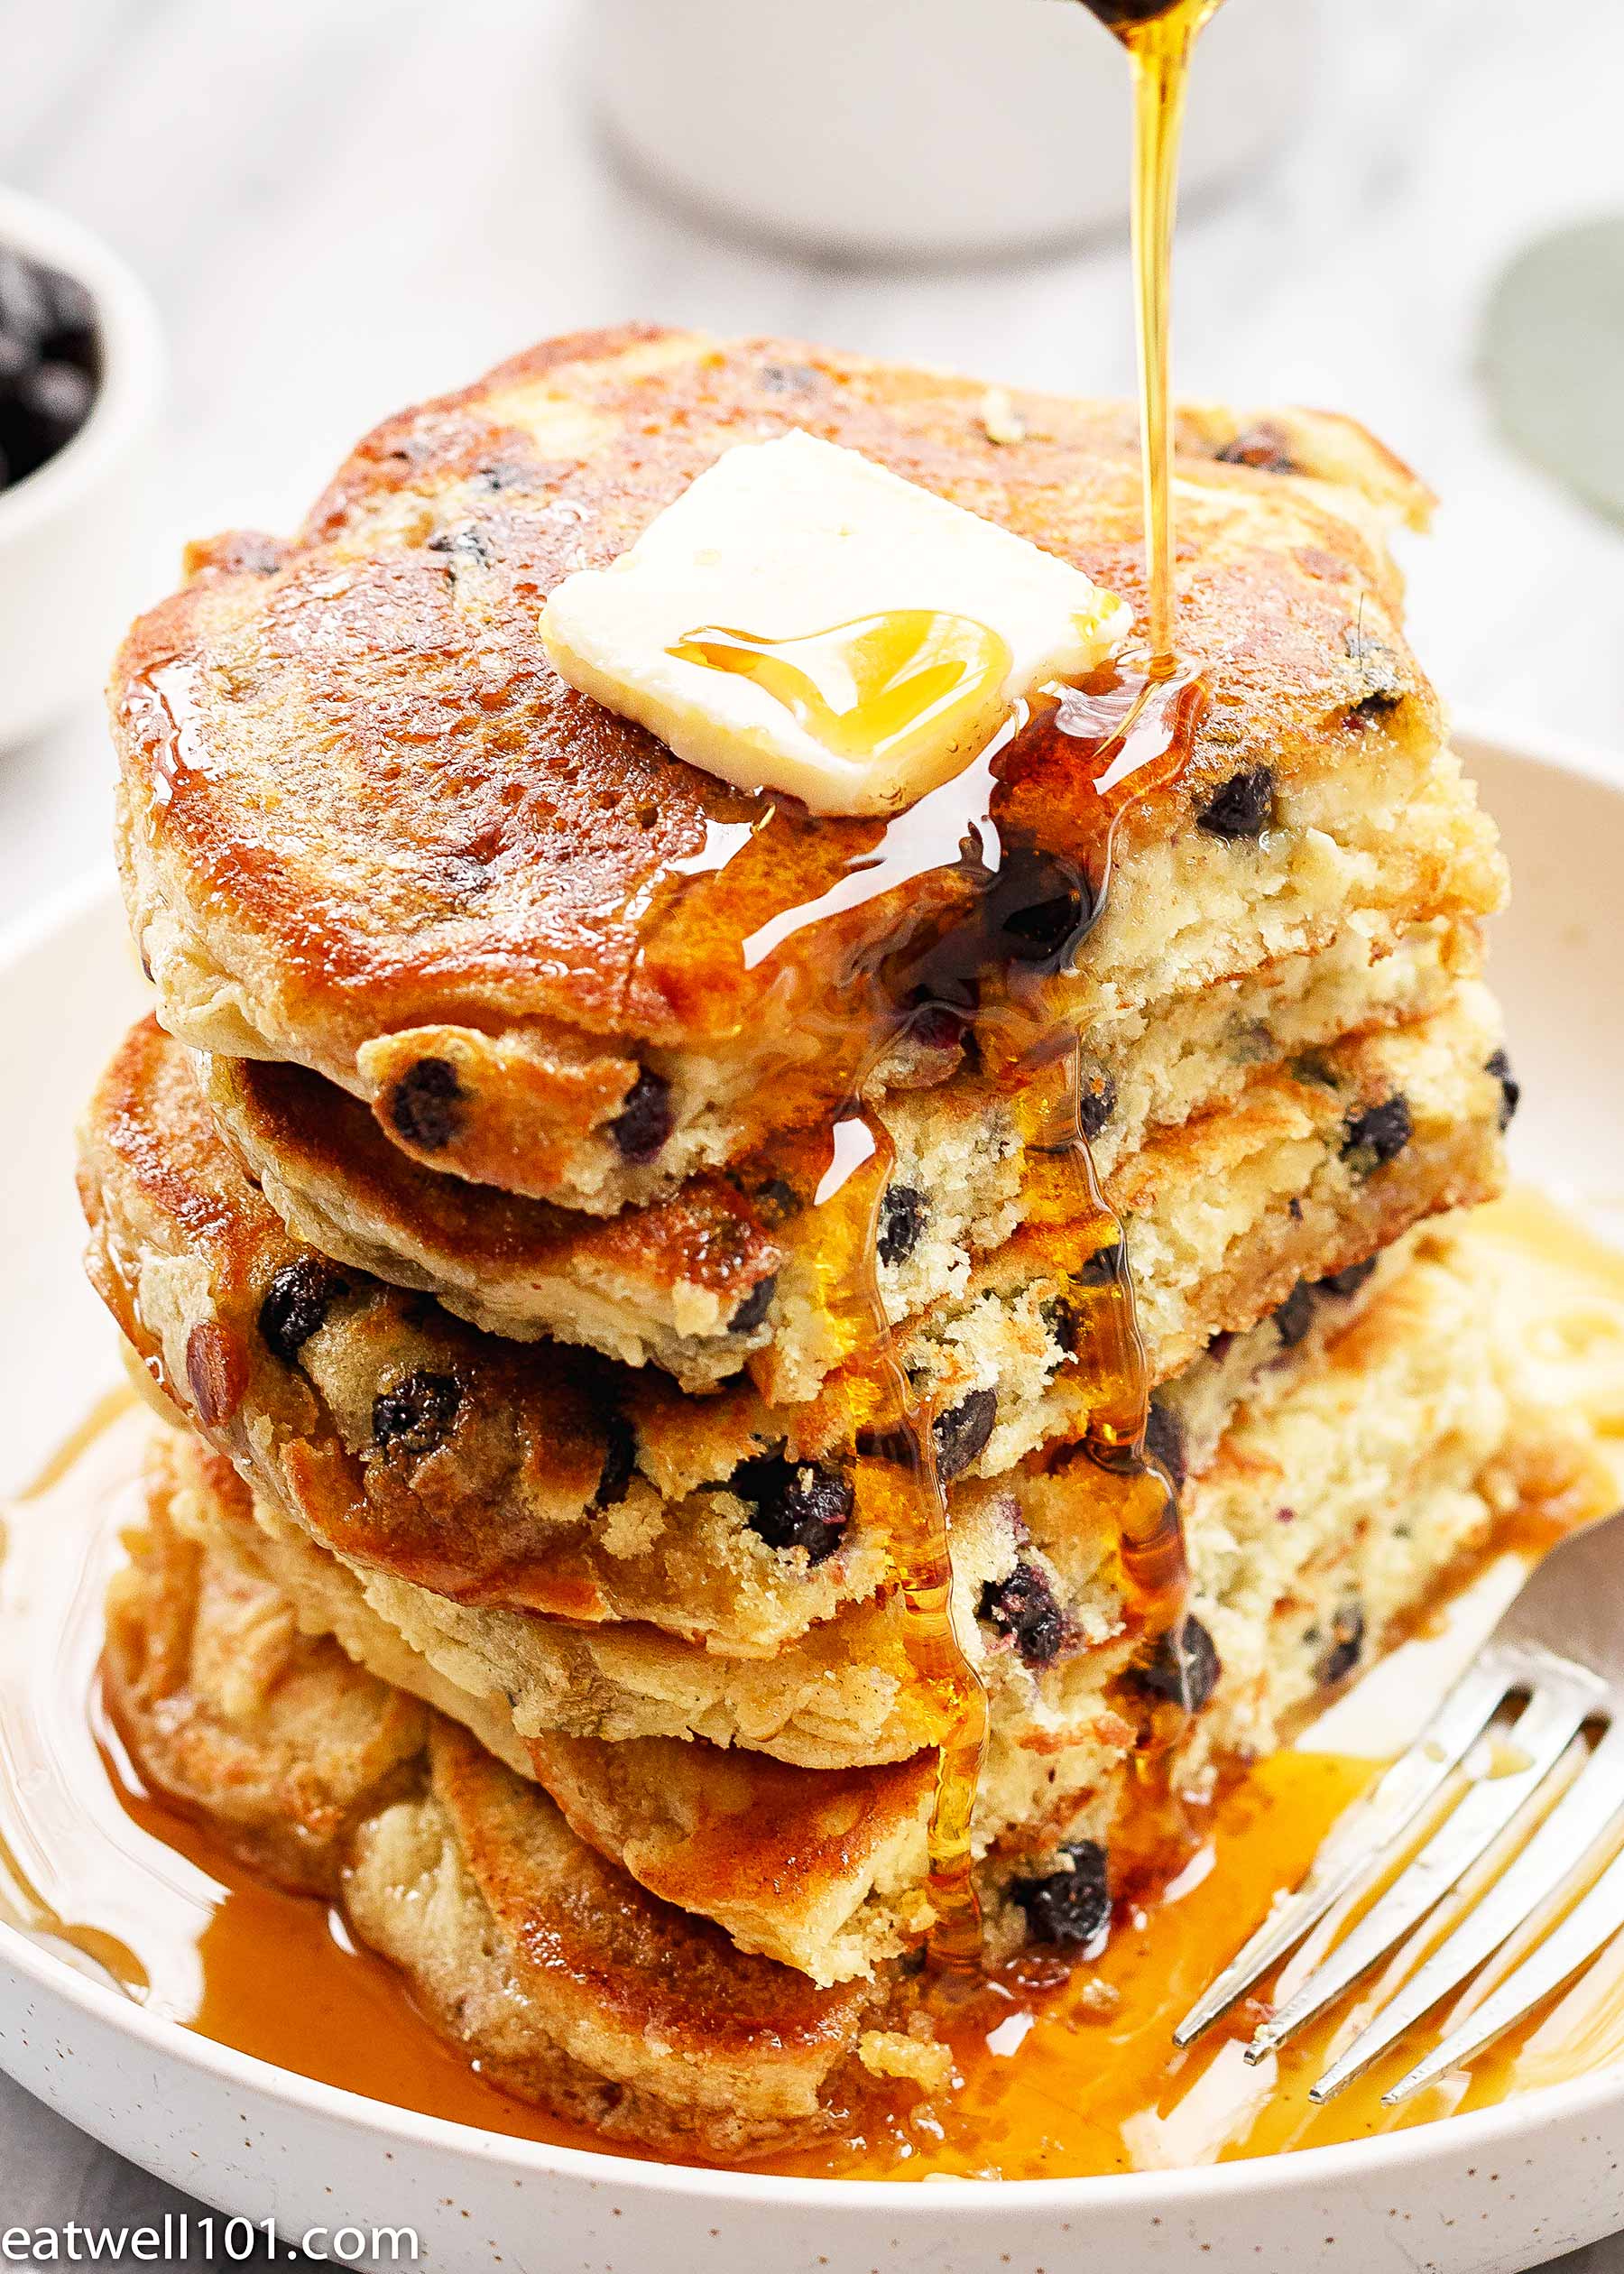 fluffy blueberry pancakes recipe - #recipe by #eatwell101®